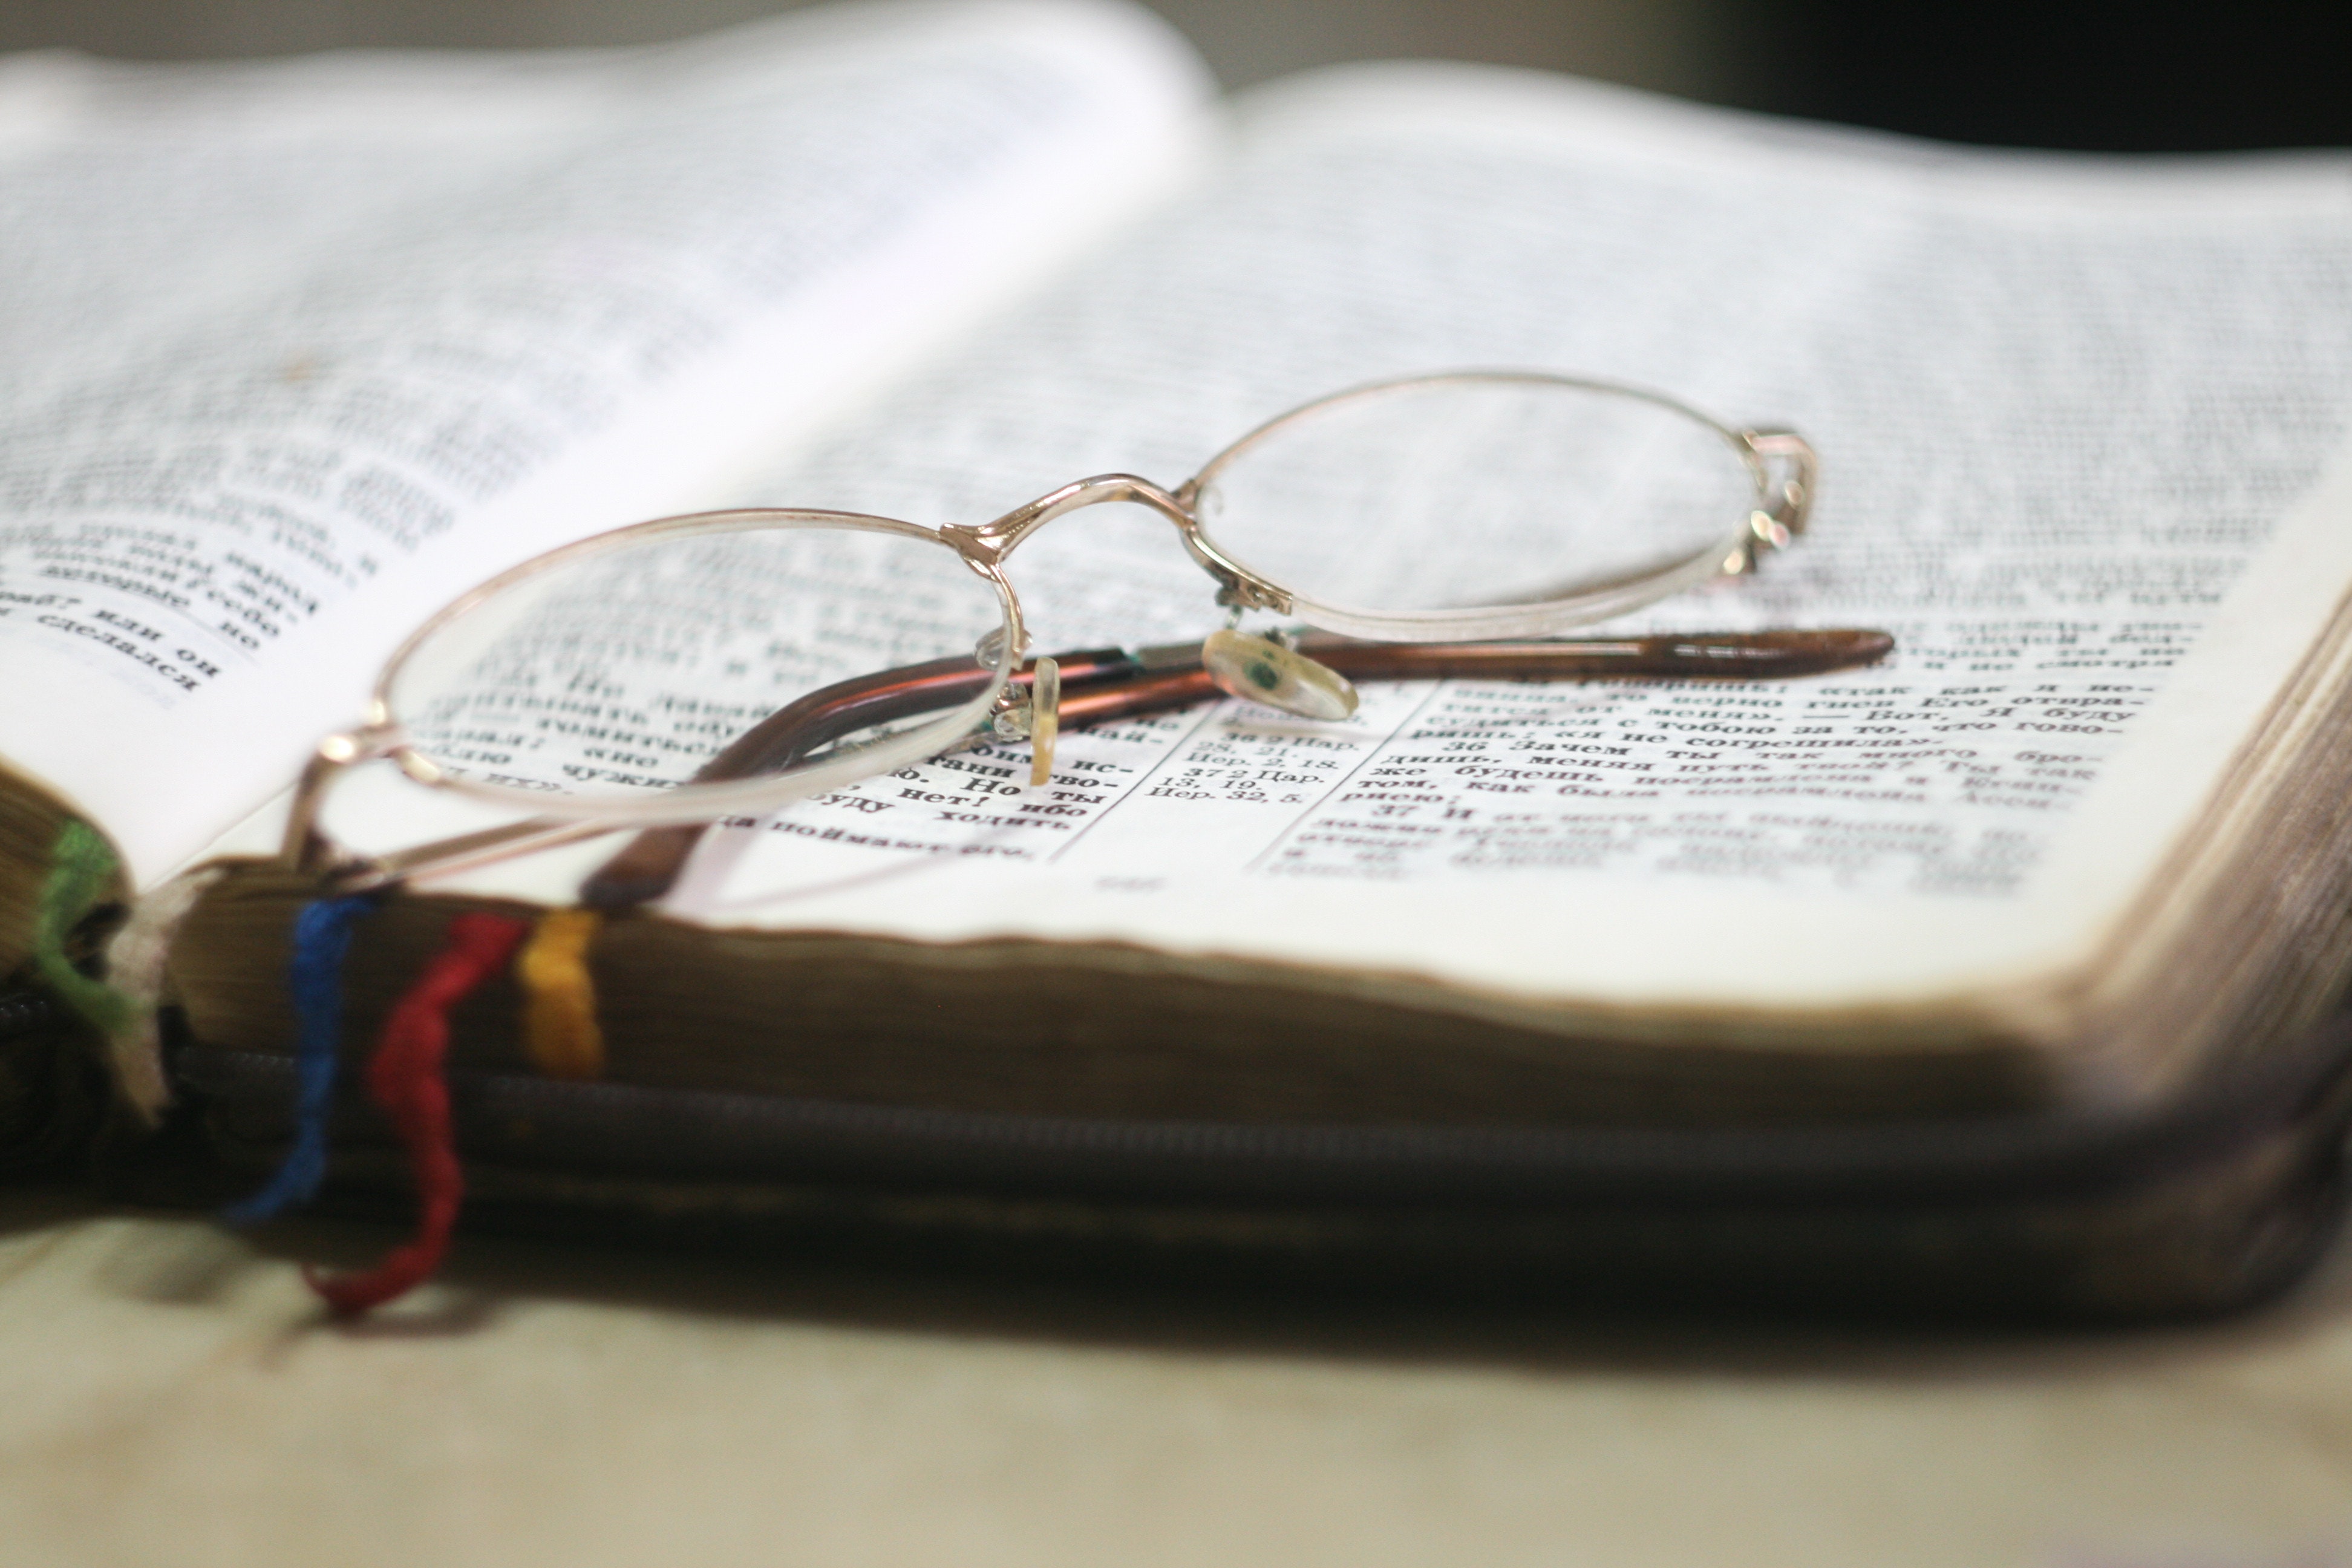 Eyeglass With Gold-colored Frames on Bible